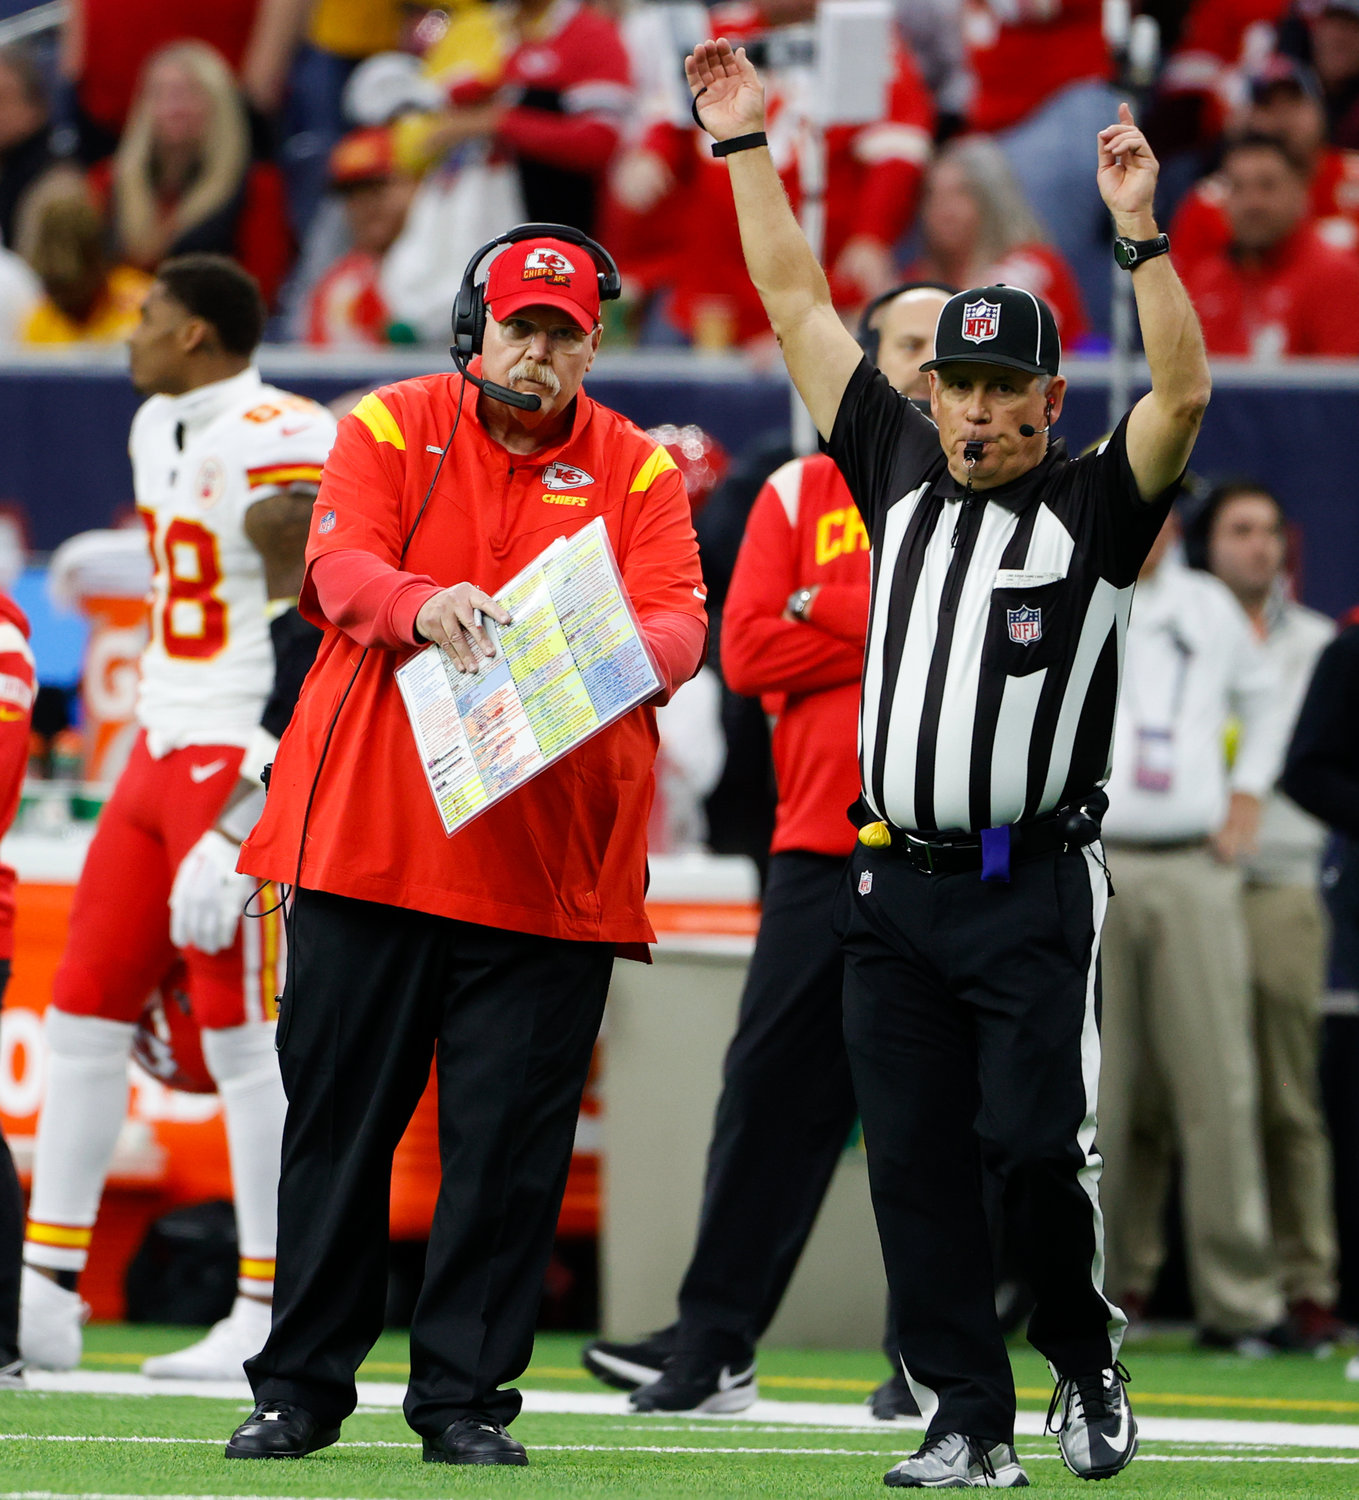 Kansas City Chiefs head coach Andy Reid calls for a time out to allow his team to attempt a potential game-winning field goal, that ultimately missed, near the end of regulation during an NFL game between the Texans and the Chiefs on Dec. 18, 2022, in Houston. The Chiefs won, 30-24, in overtime.